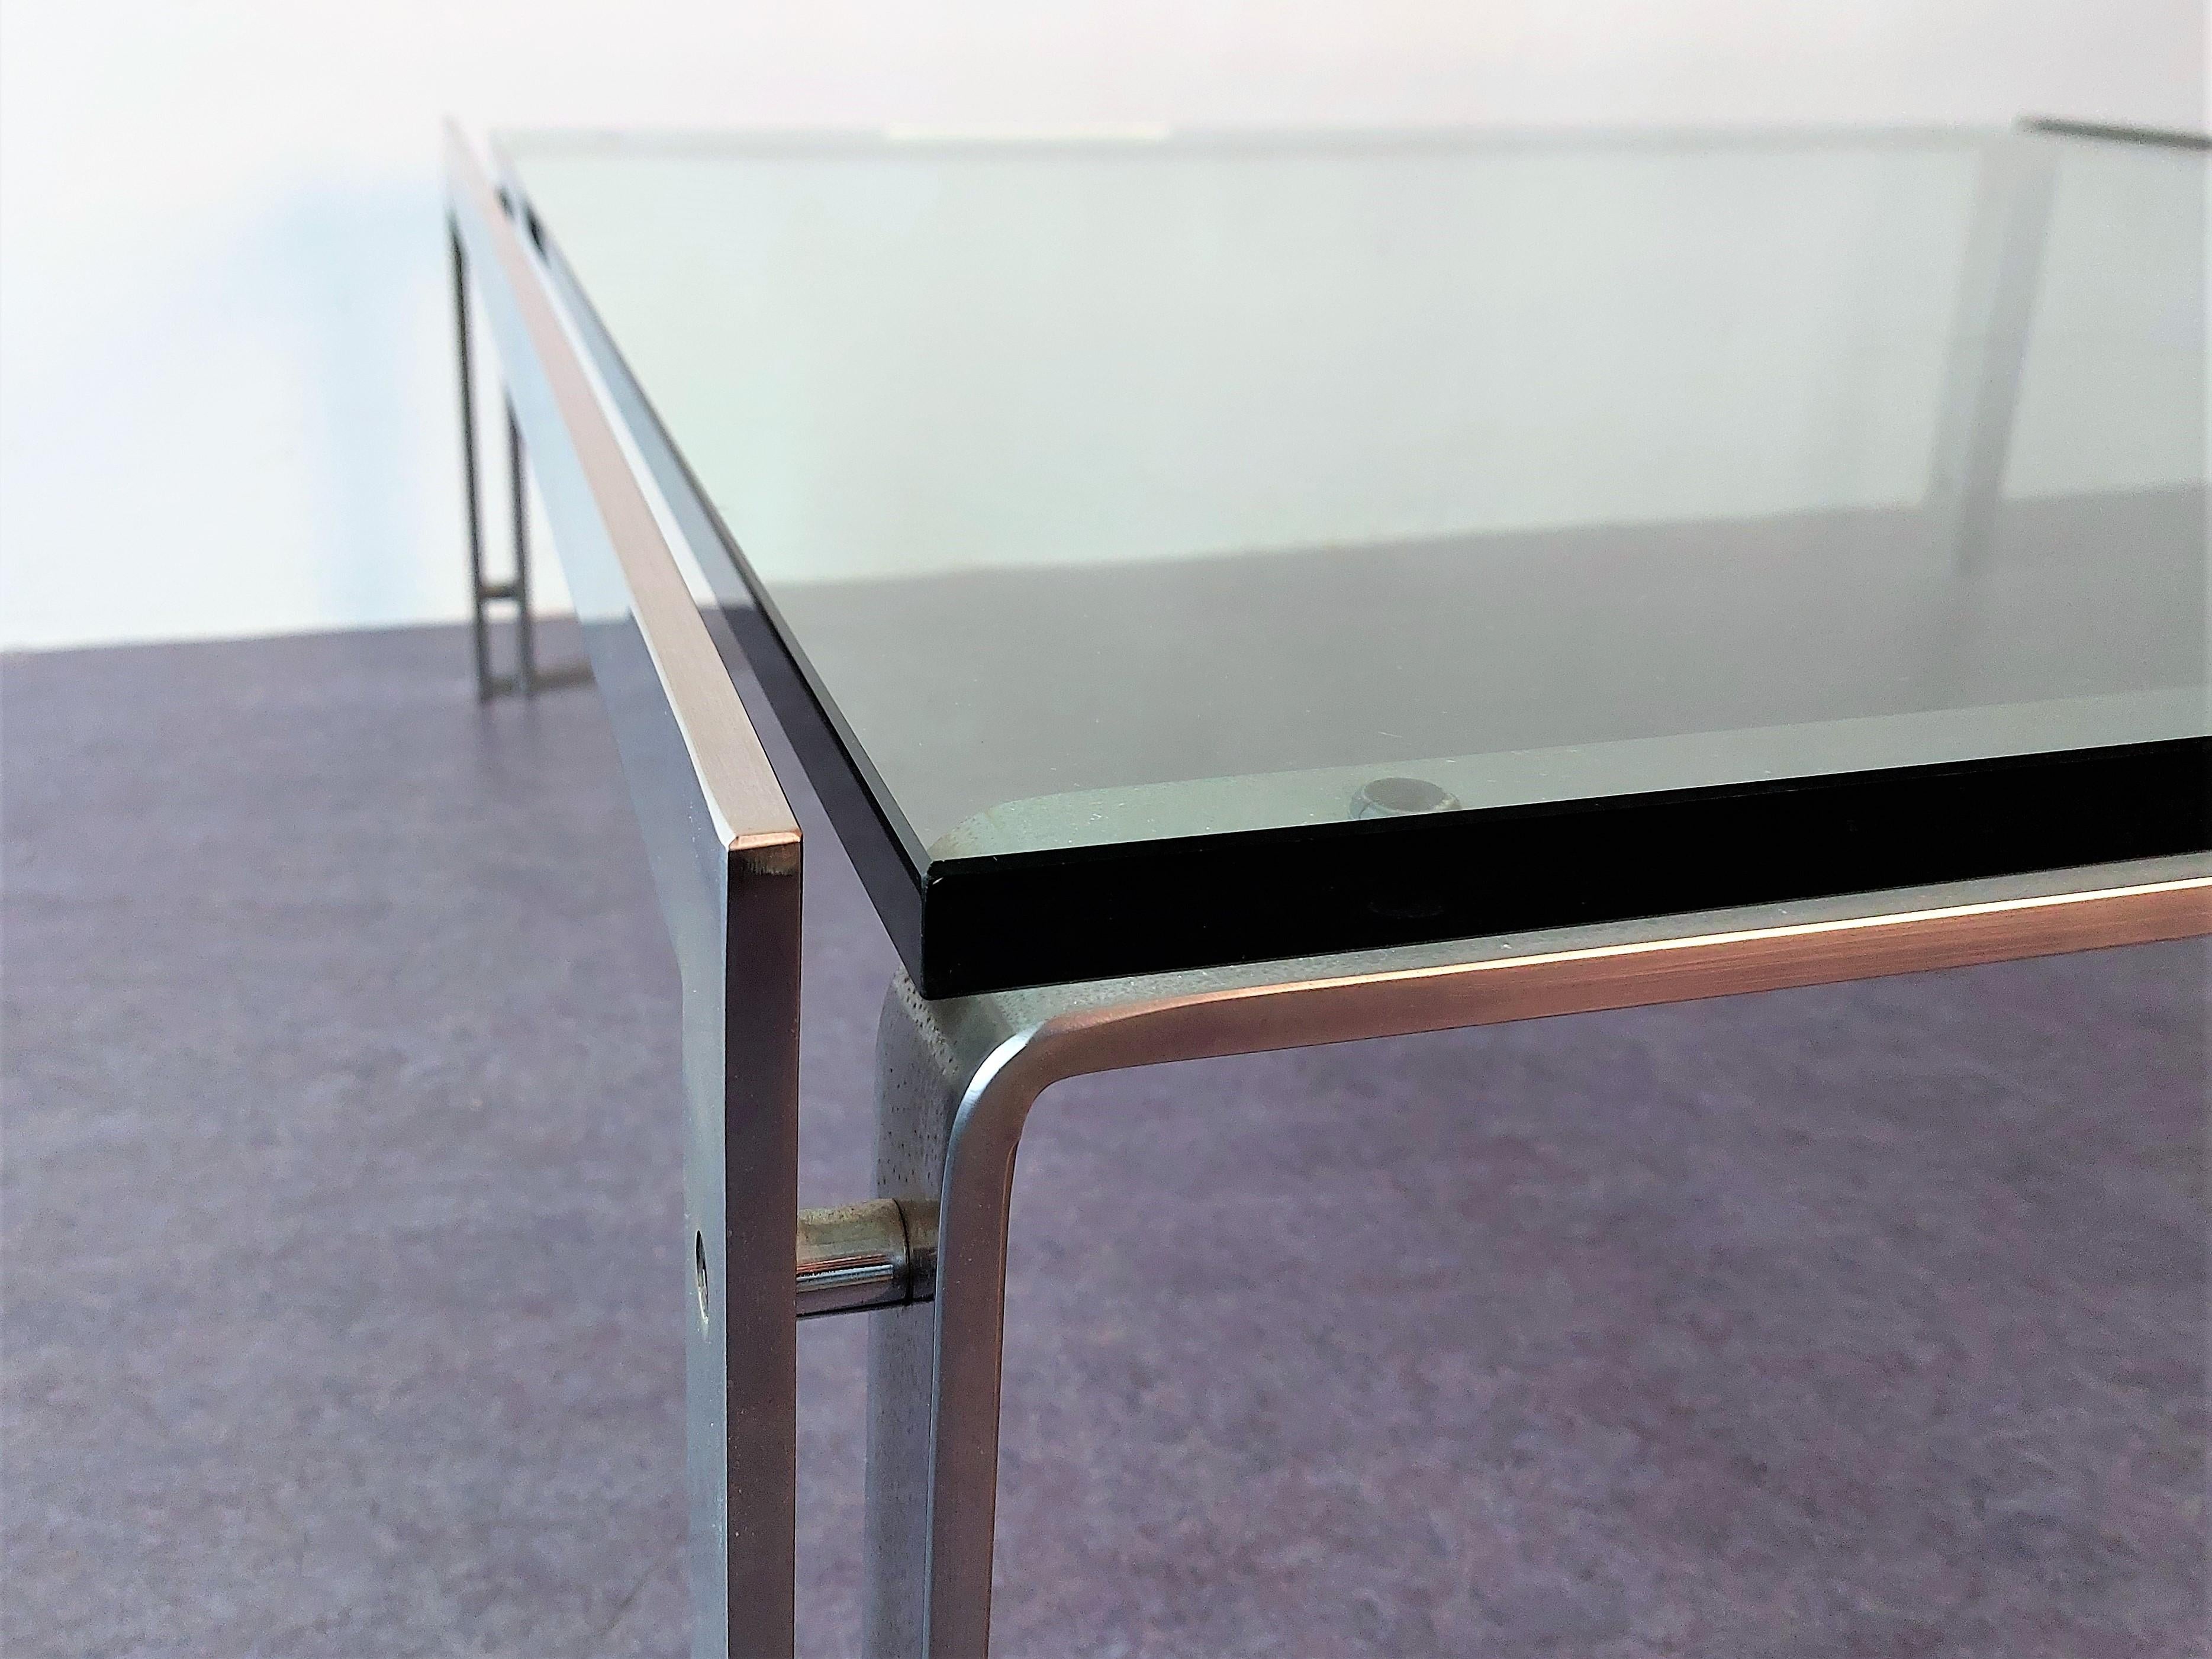 Late 20th Century Large Steel and Glass M1 Coffee Table by Hank Kwint for Metaform, 1980's For Sale